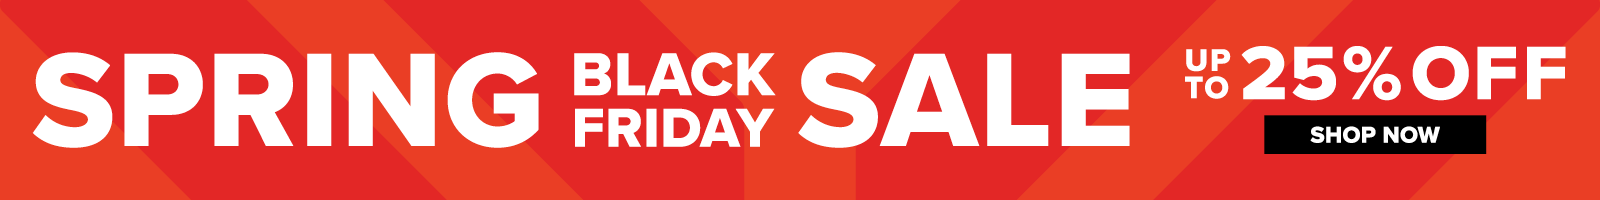 Spring Black Friday Sale Up to 25% Off Shop Now